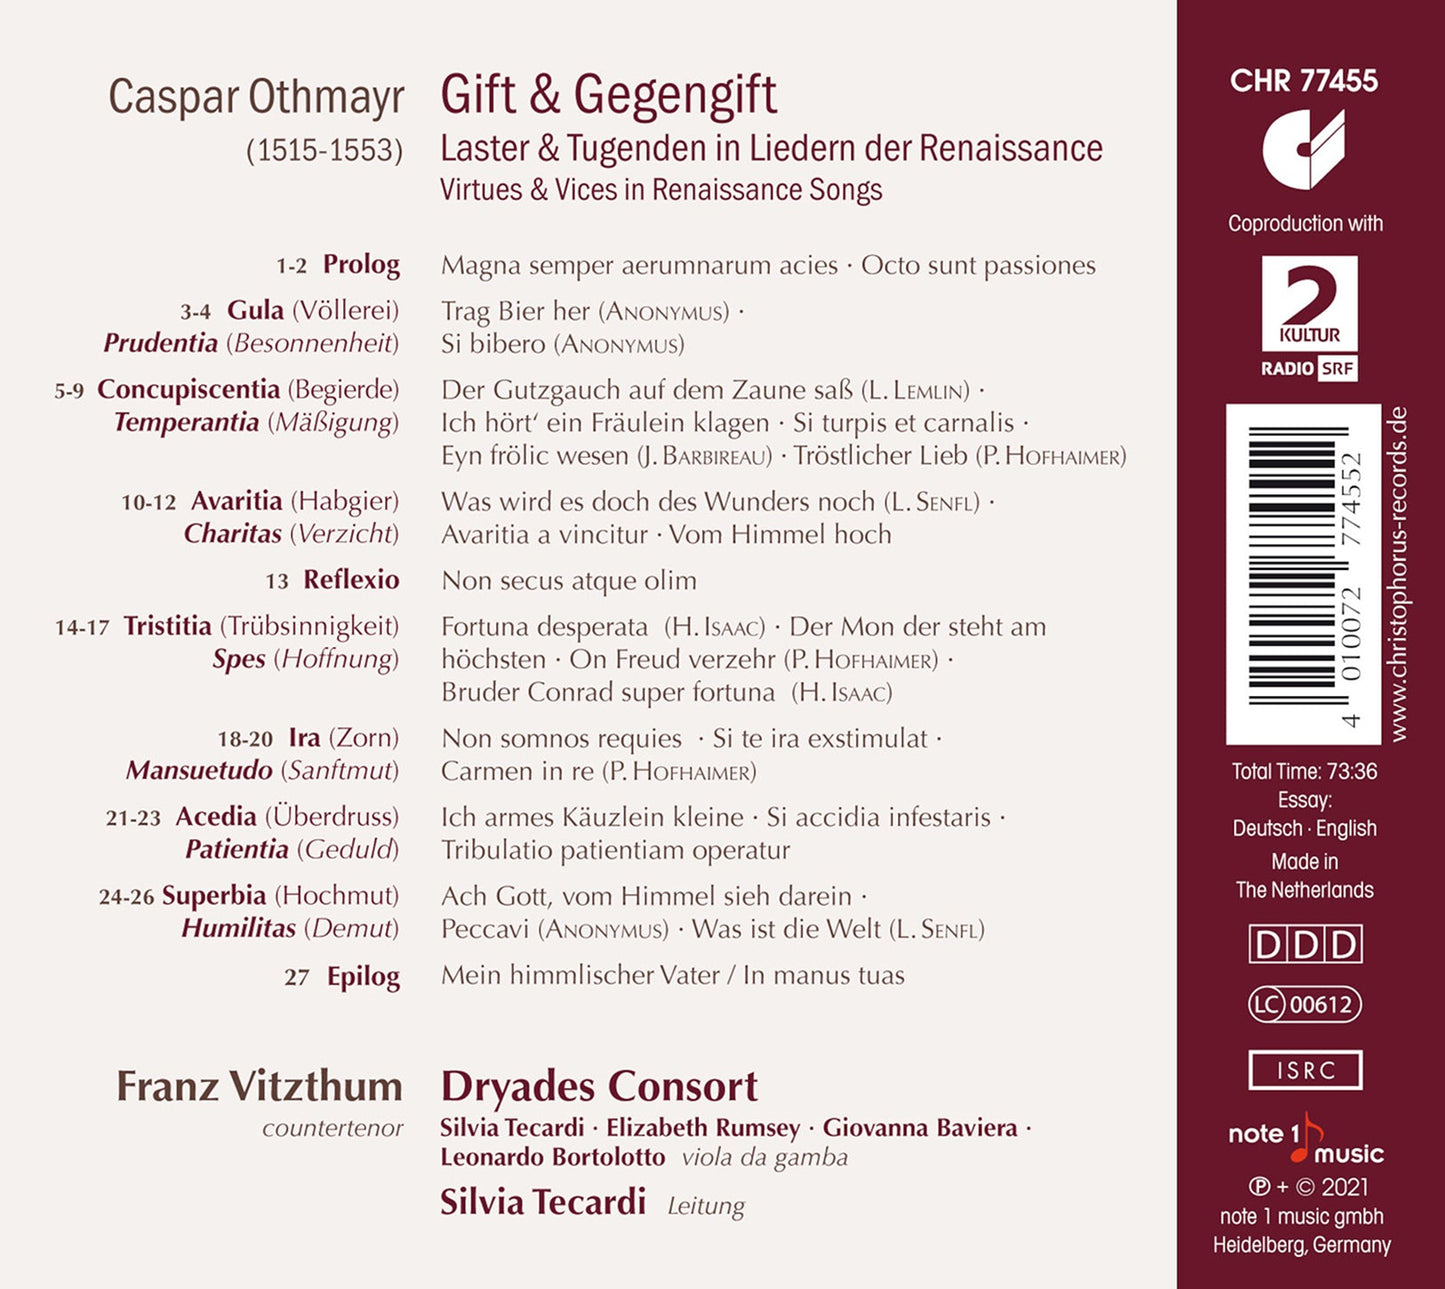 Gift & Gegengift - Vices And Virtues In Renaissance Songs